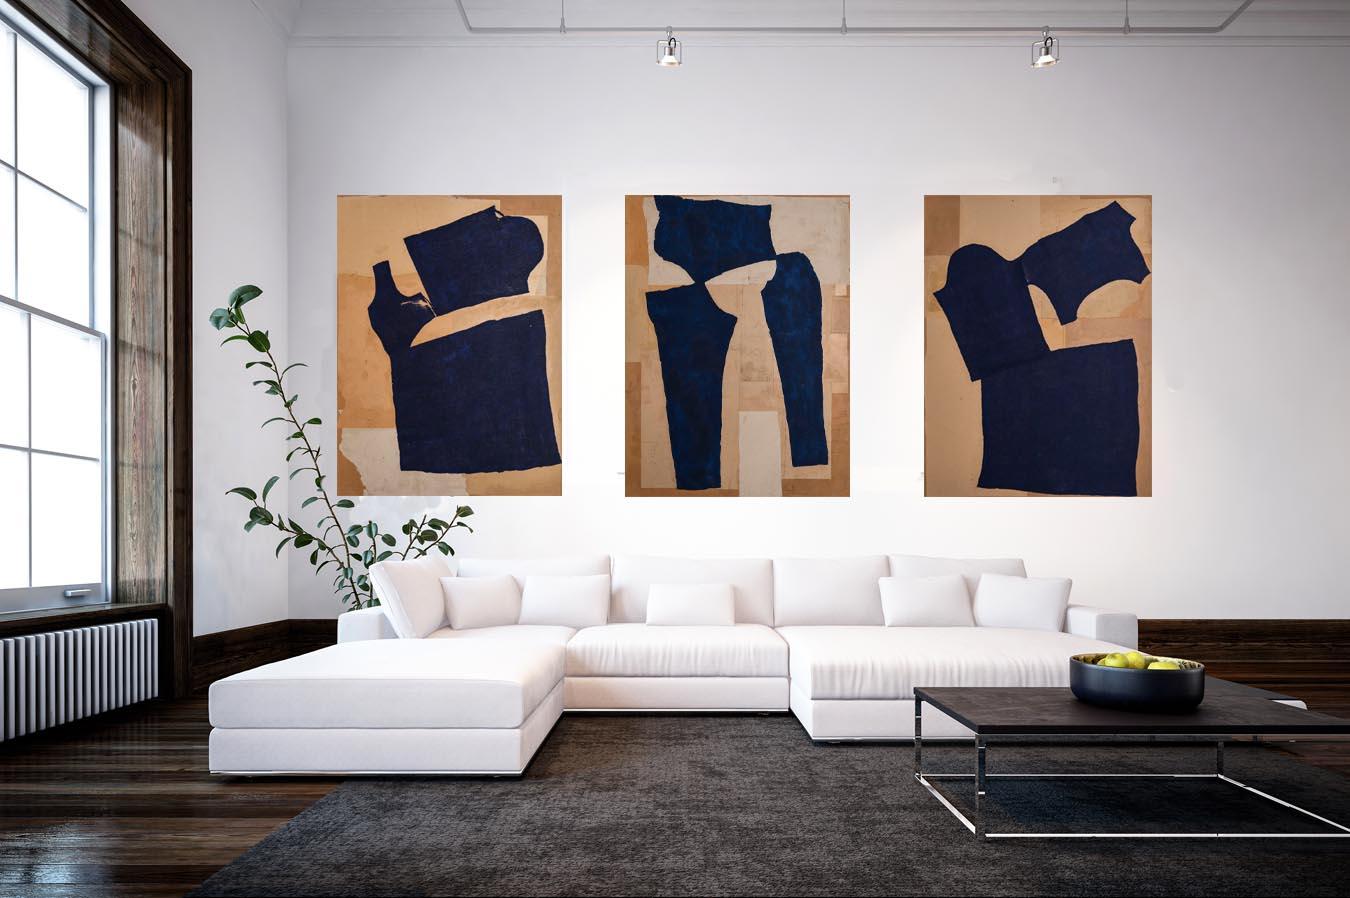 Undone series, large blue abstract cut outs , Triptych, fashion art collage, – Art von Nicola Grellier